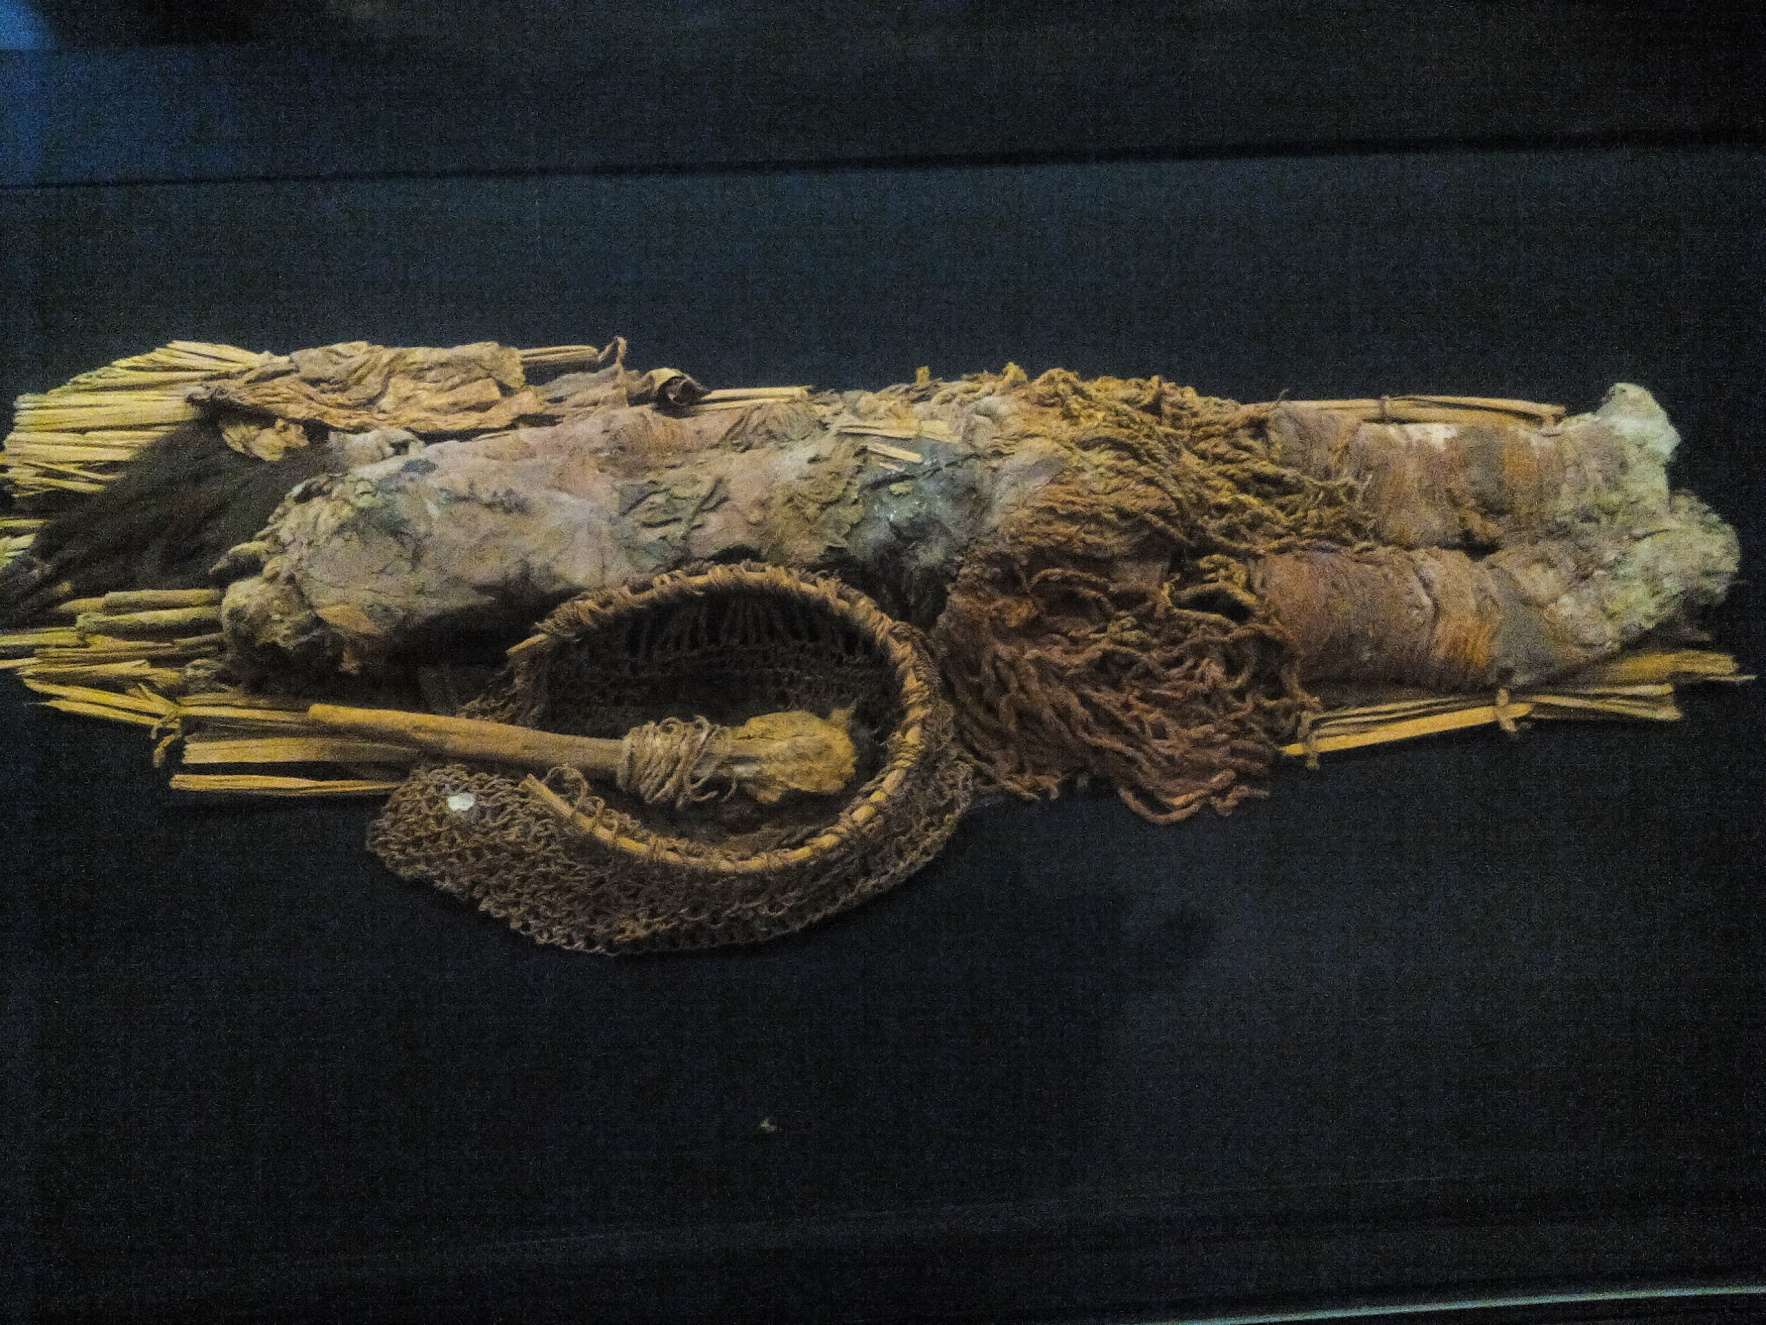 Infant remains preserved with the Red Mummy technique.